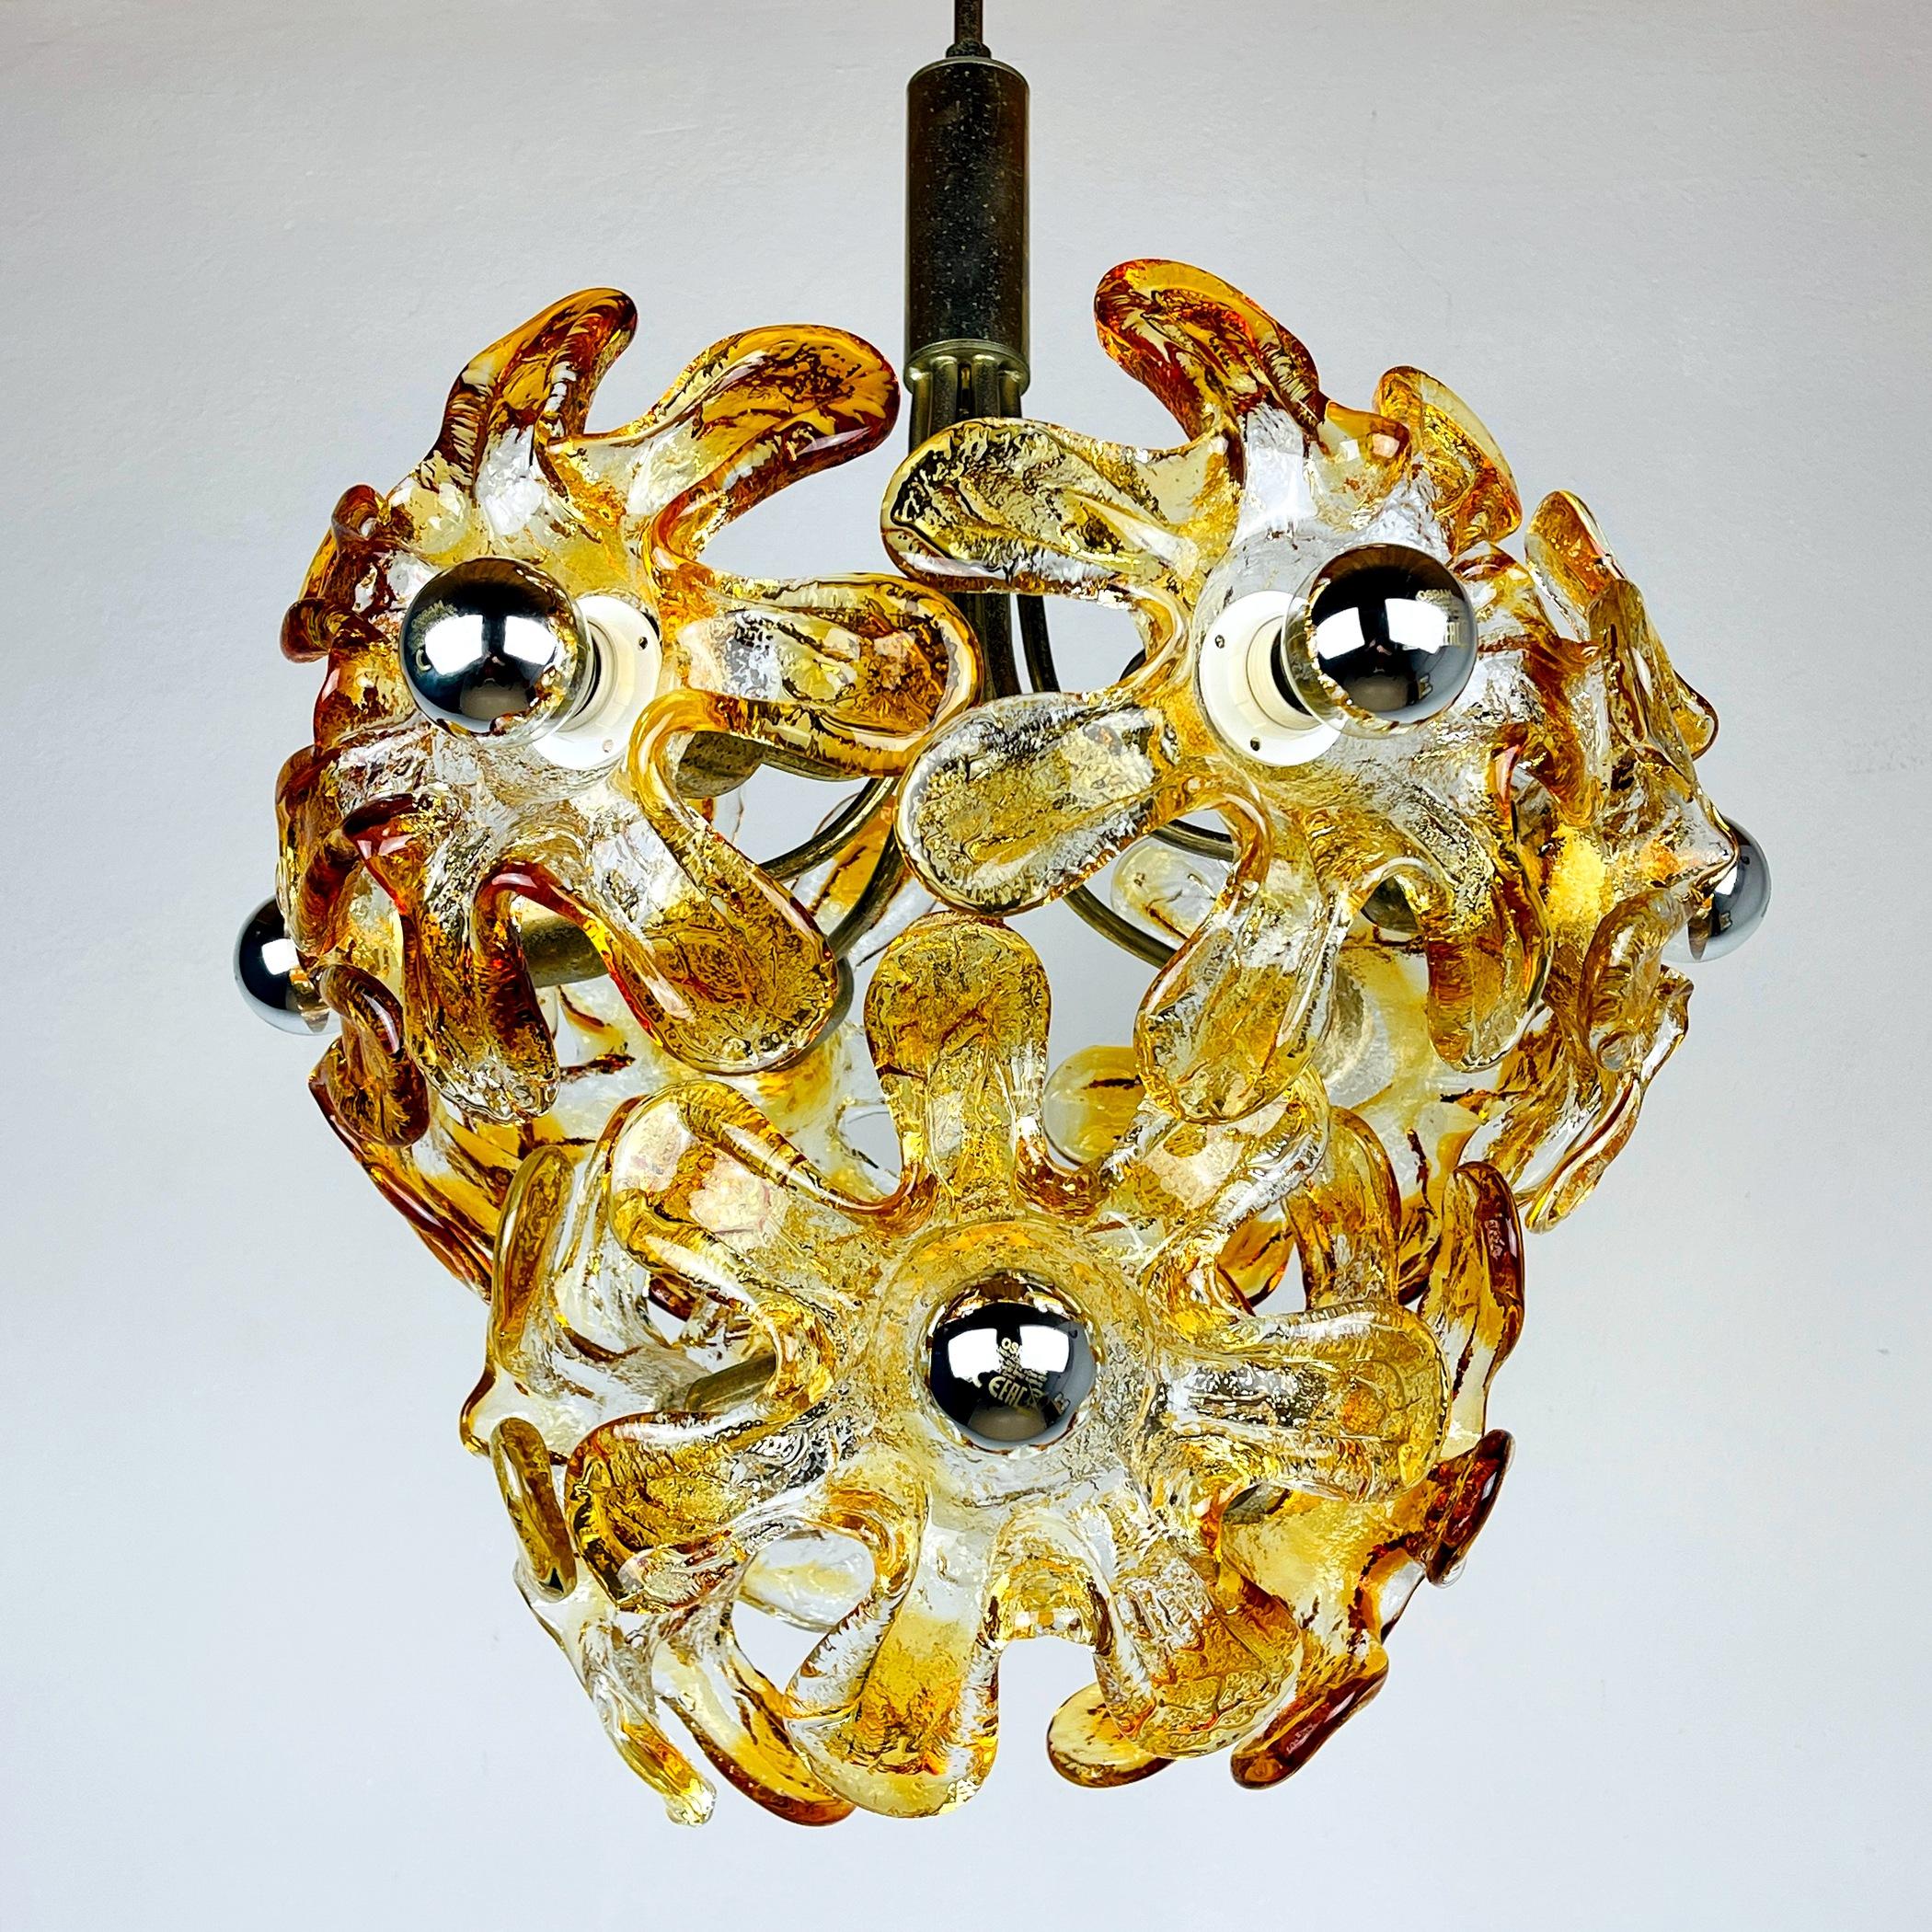 Mid-century amber Murano chandelier Flowers Mazzega was made in Italy in the 1970s. AV Mazzega was founded in 1946 by Angelo Vittorio Mazzega. Mazzega and has worked with many internationally renowned designers such as De Lucchi, Piva, Zuccheri over